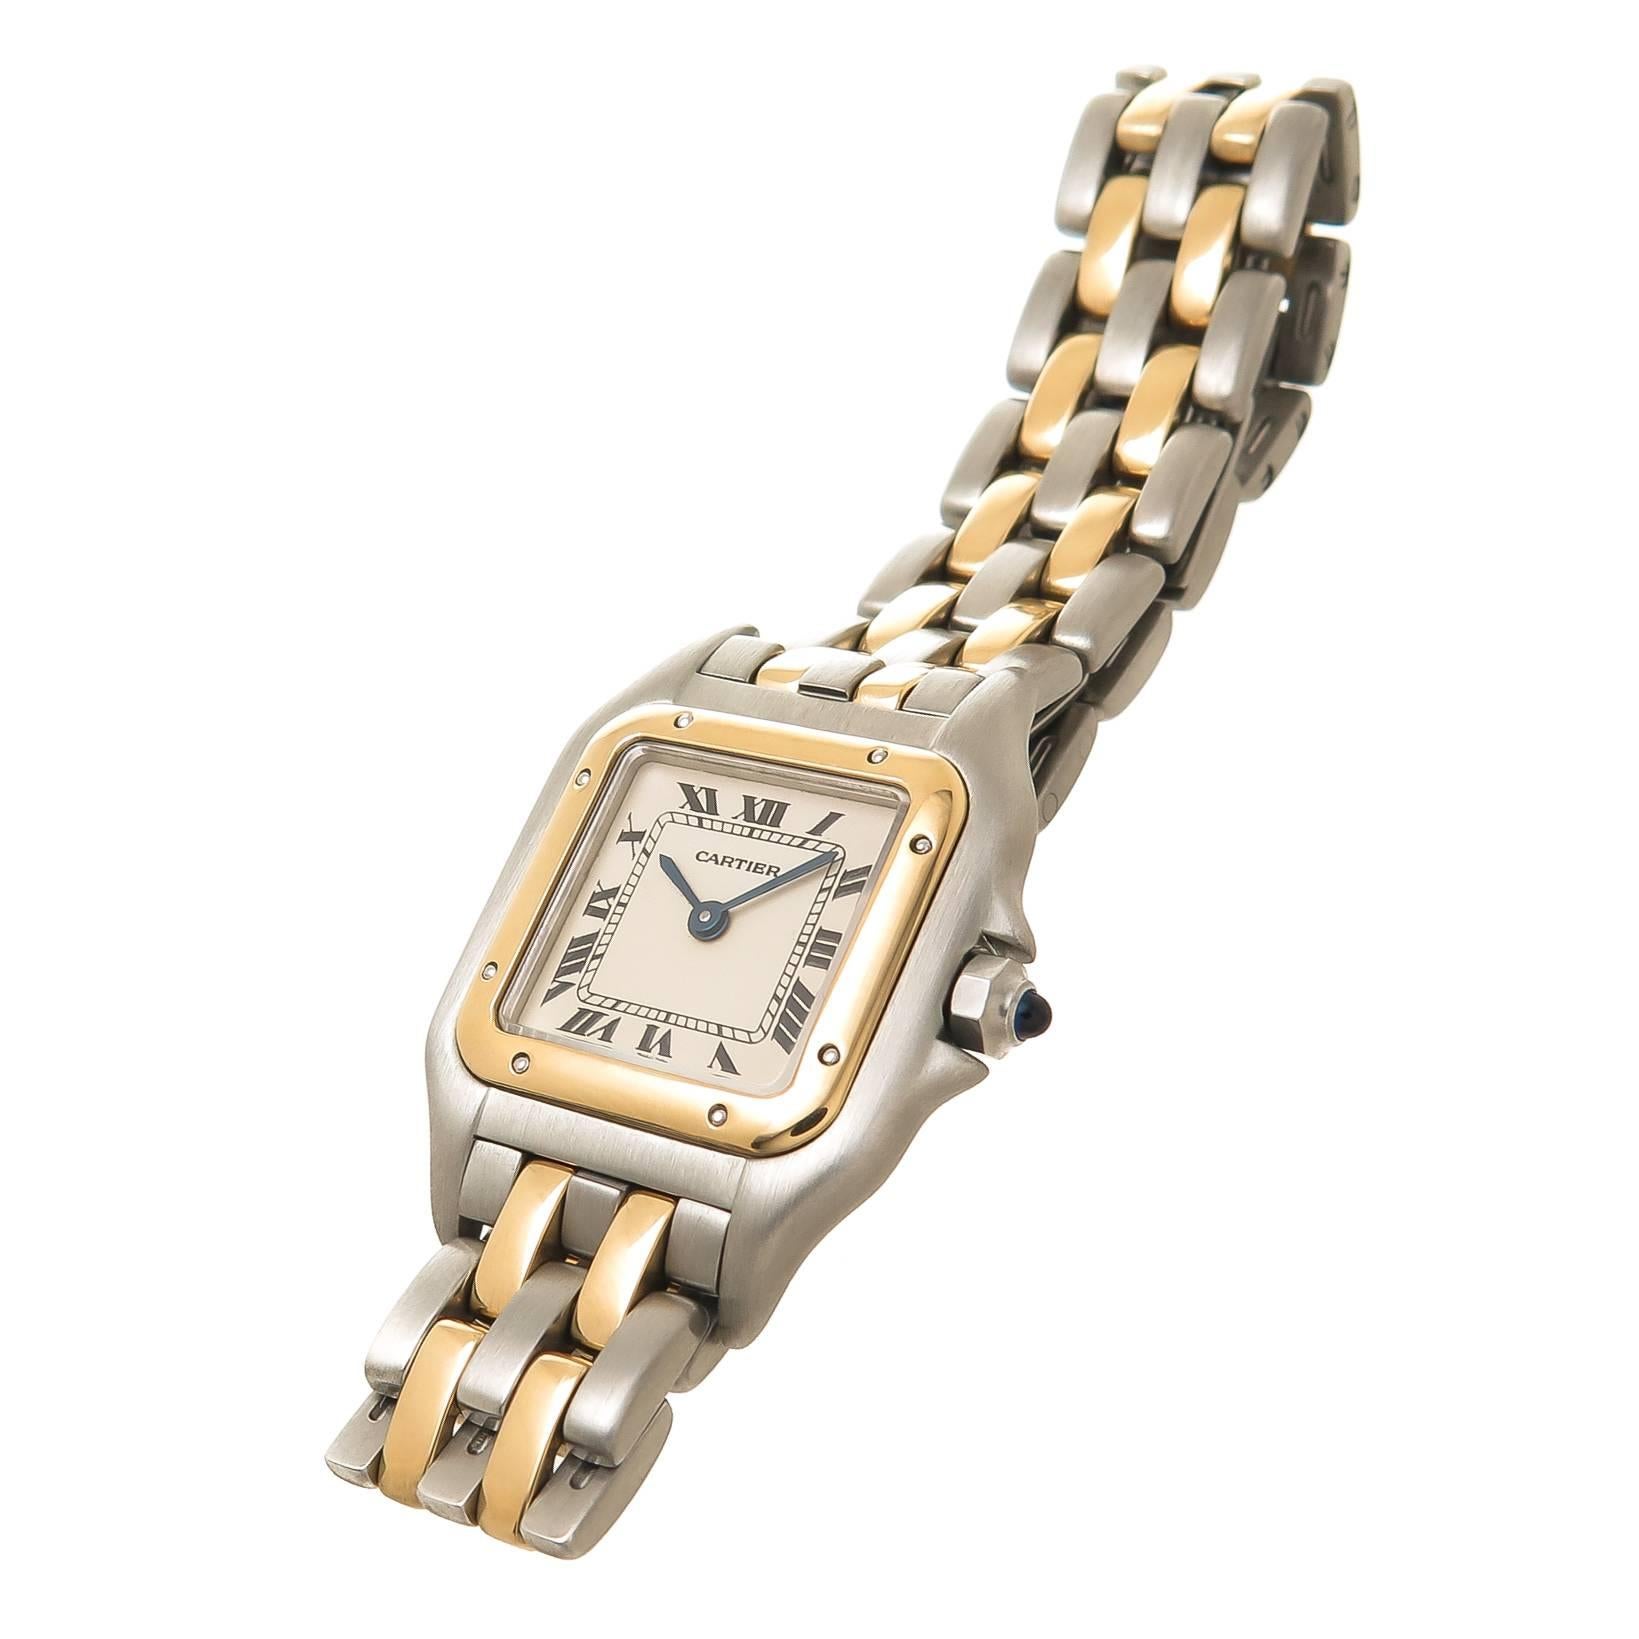 Circa 1990s Cartier Ladies Panther Collection Ladies Watch, 30 X 23 MM Stainless Steel Water resistant Case with 18K yellow Gold Bezel, Quartz Movement, White Dial with Black Roman Numerals and a sapphire Crown. 1/2 inch wide 